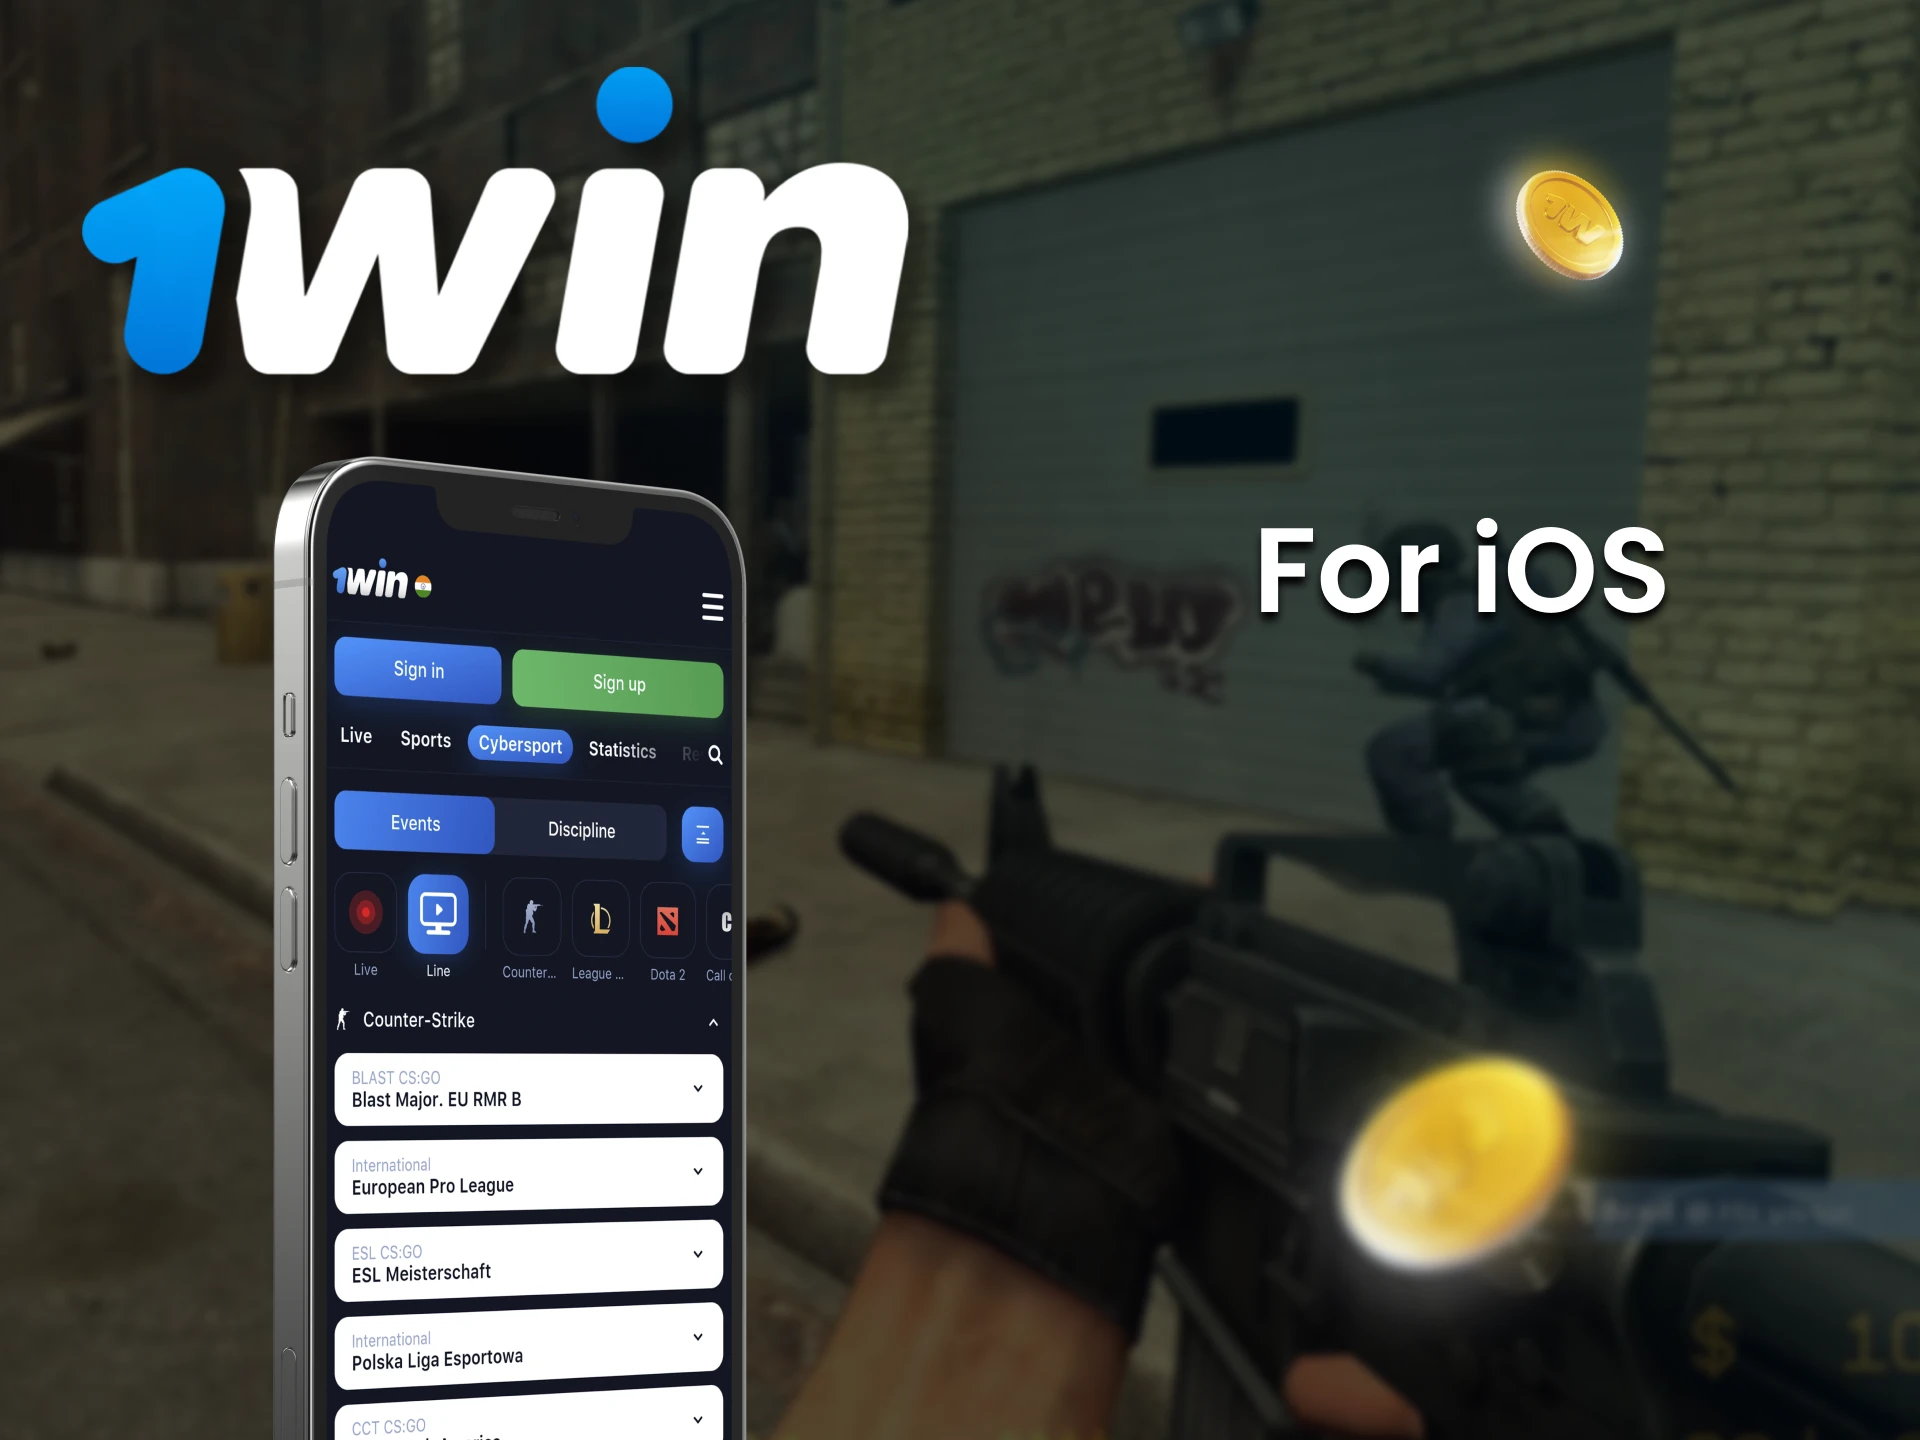 Bet on esports with the 1win iOS app.